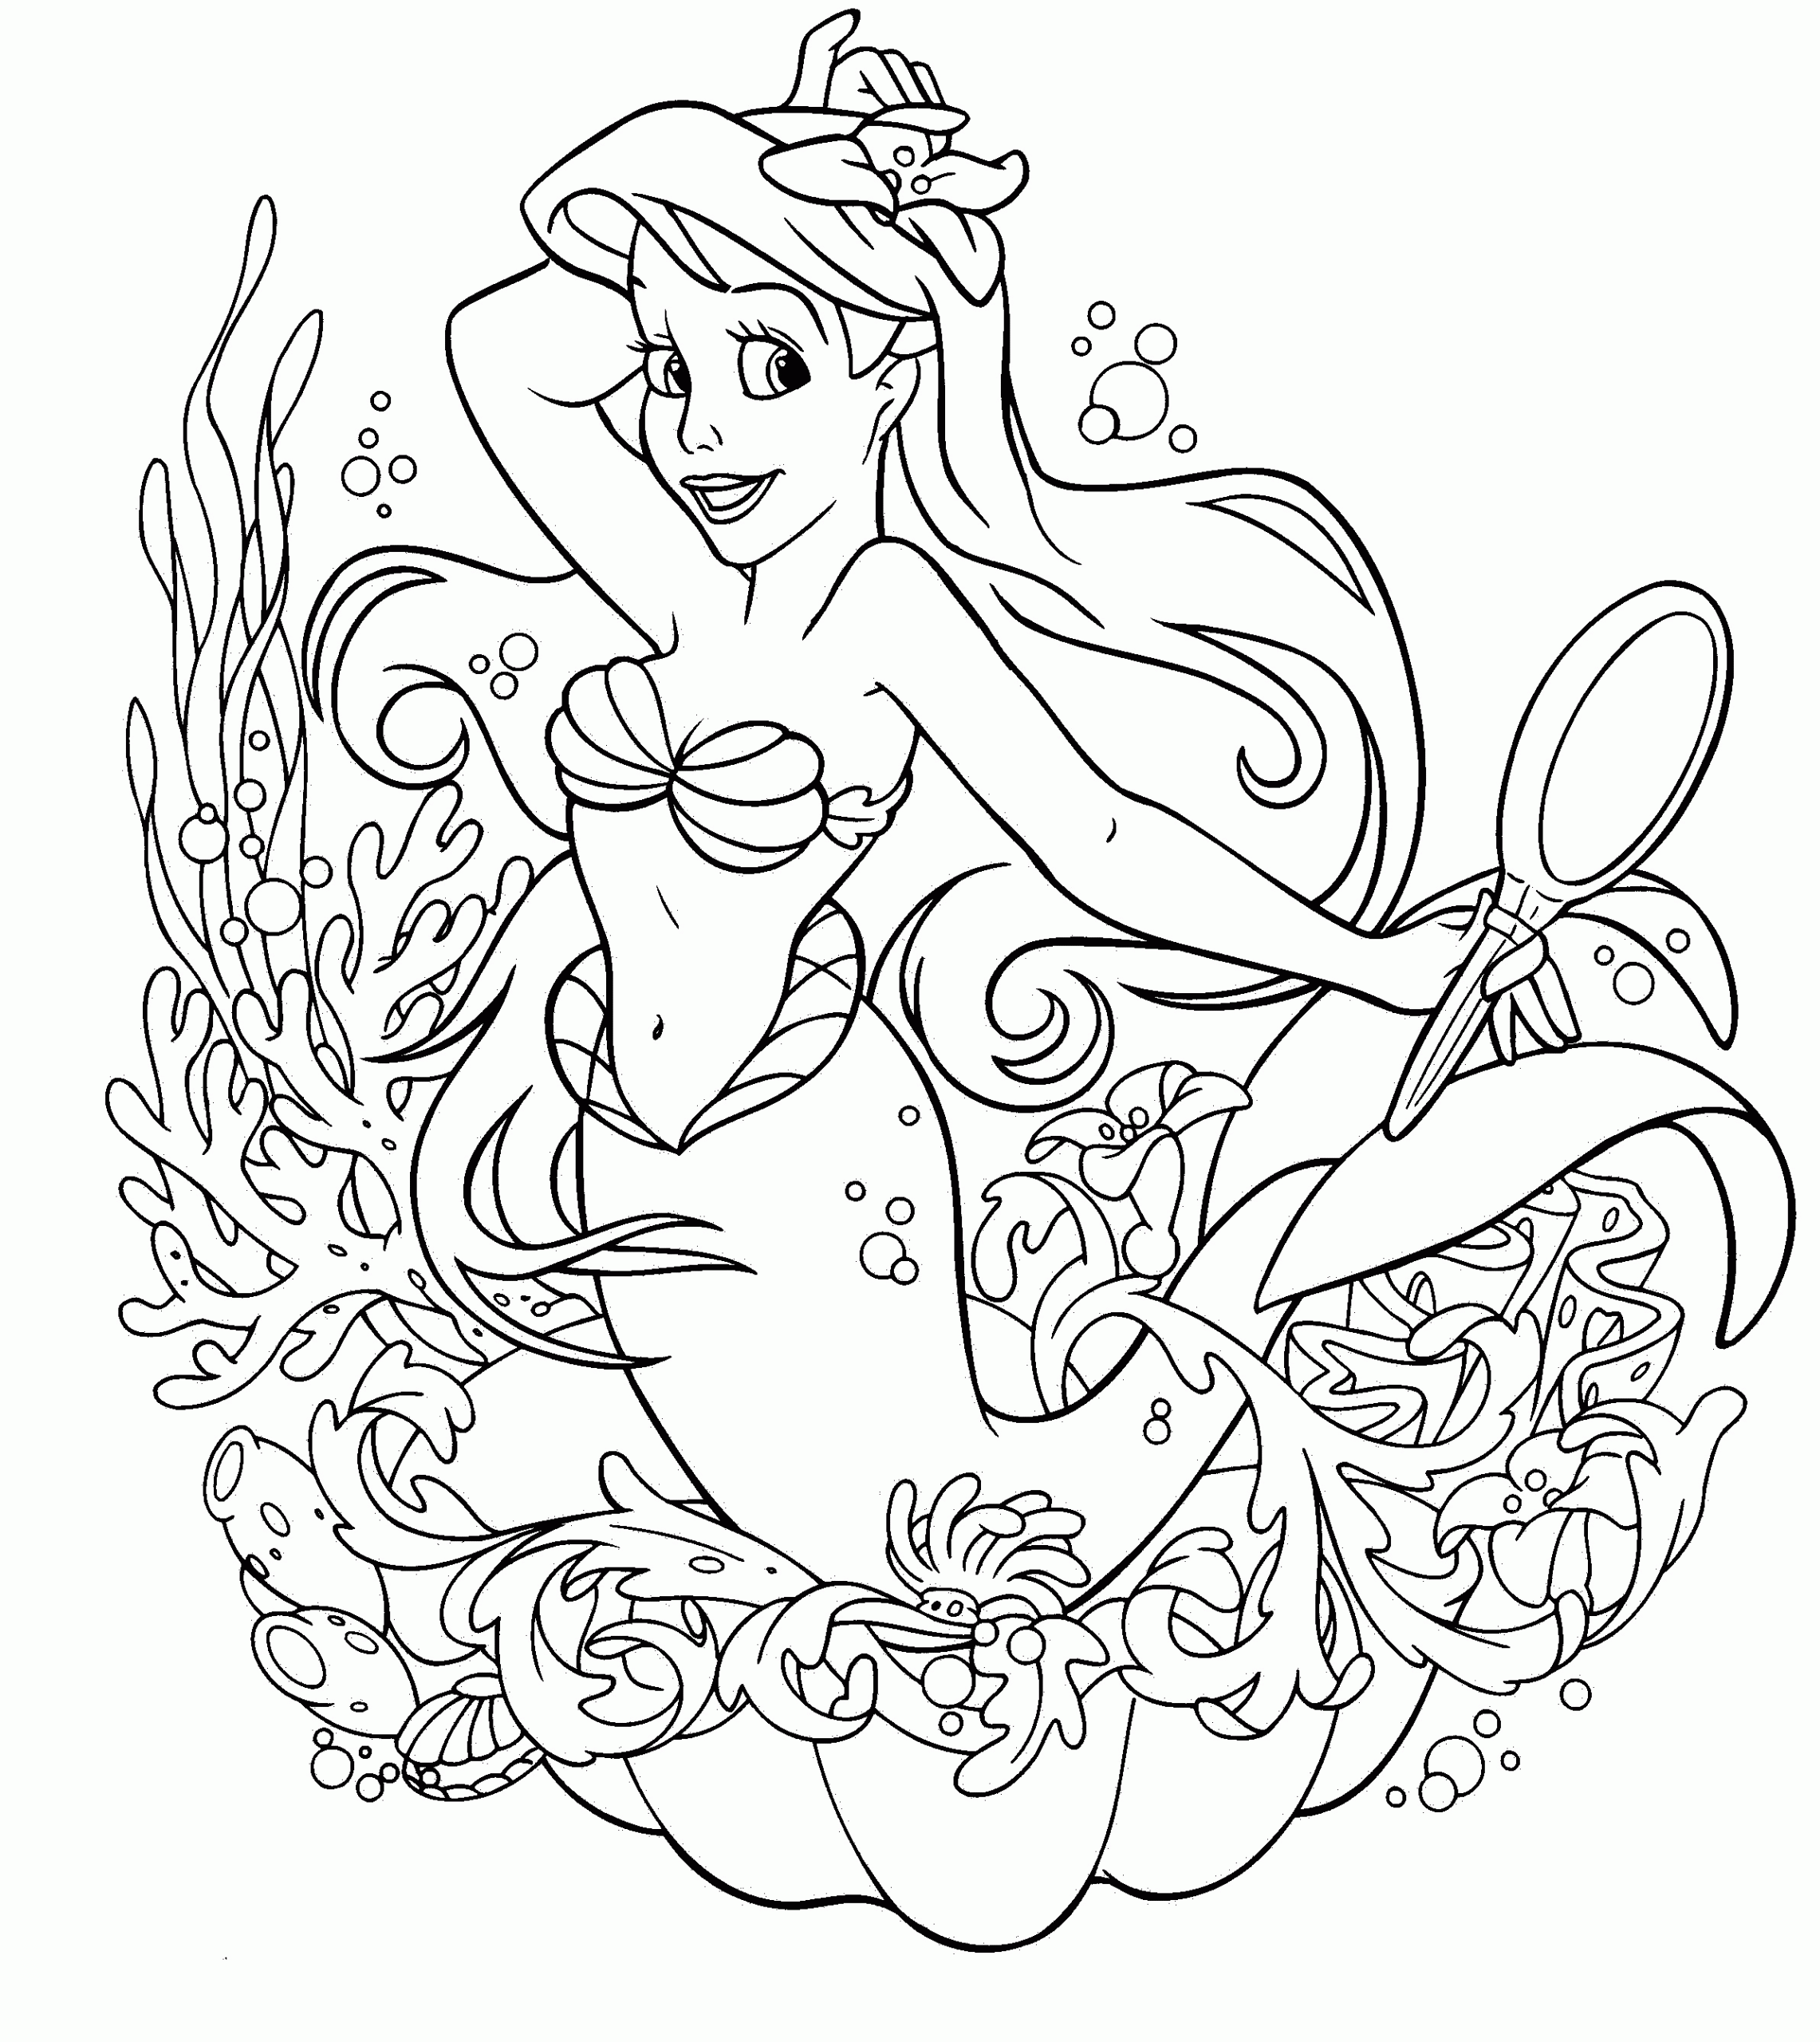 Coloring Pages For Girls To Print
 Coloring Pages for Girls Dr Odd